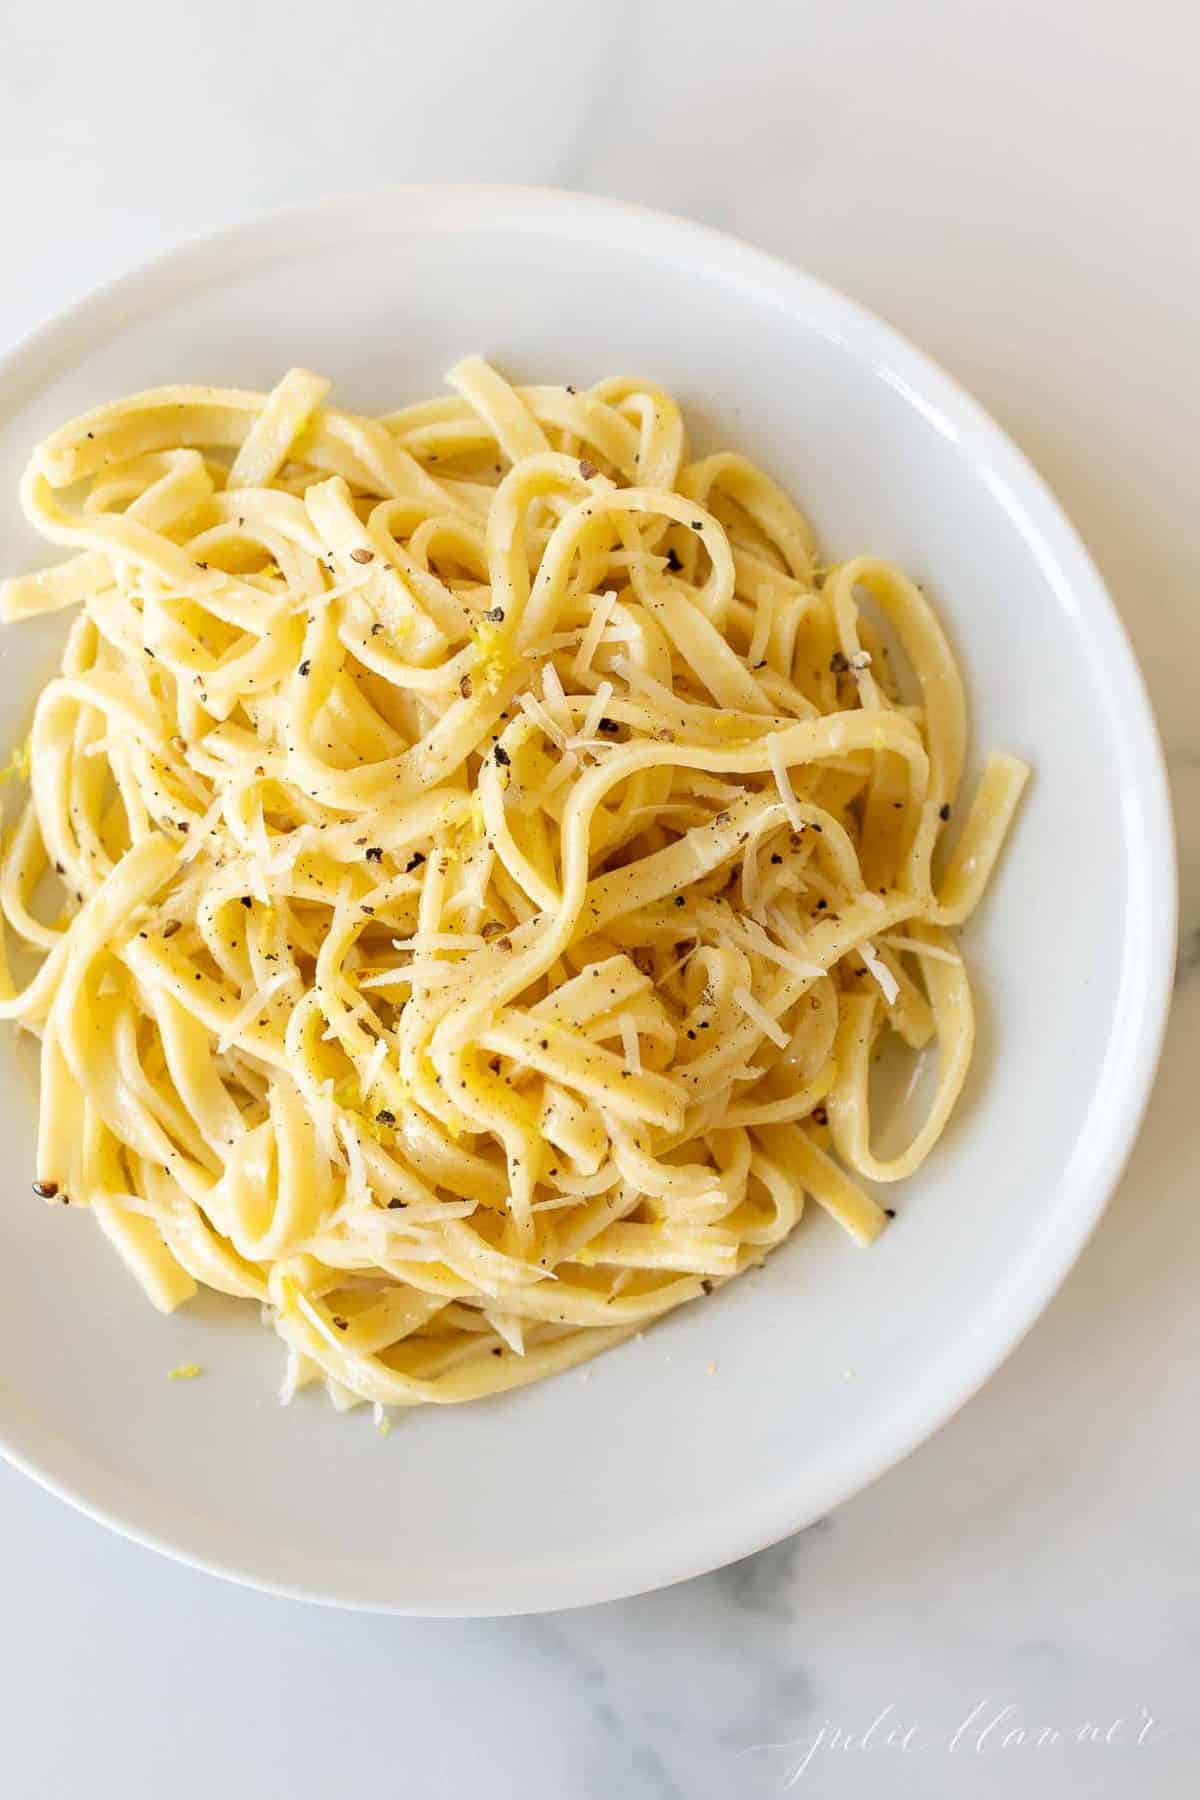 A white plate with a bowl full of lemon pepper pasta.